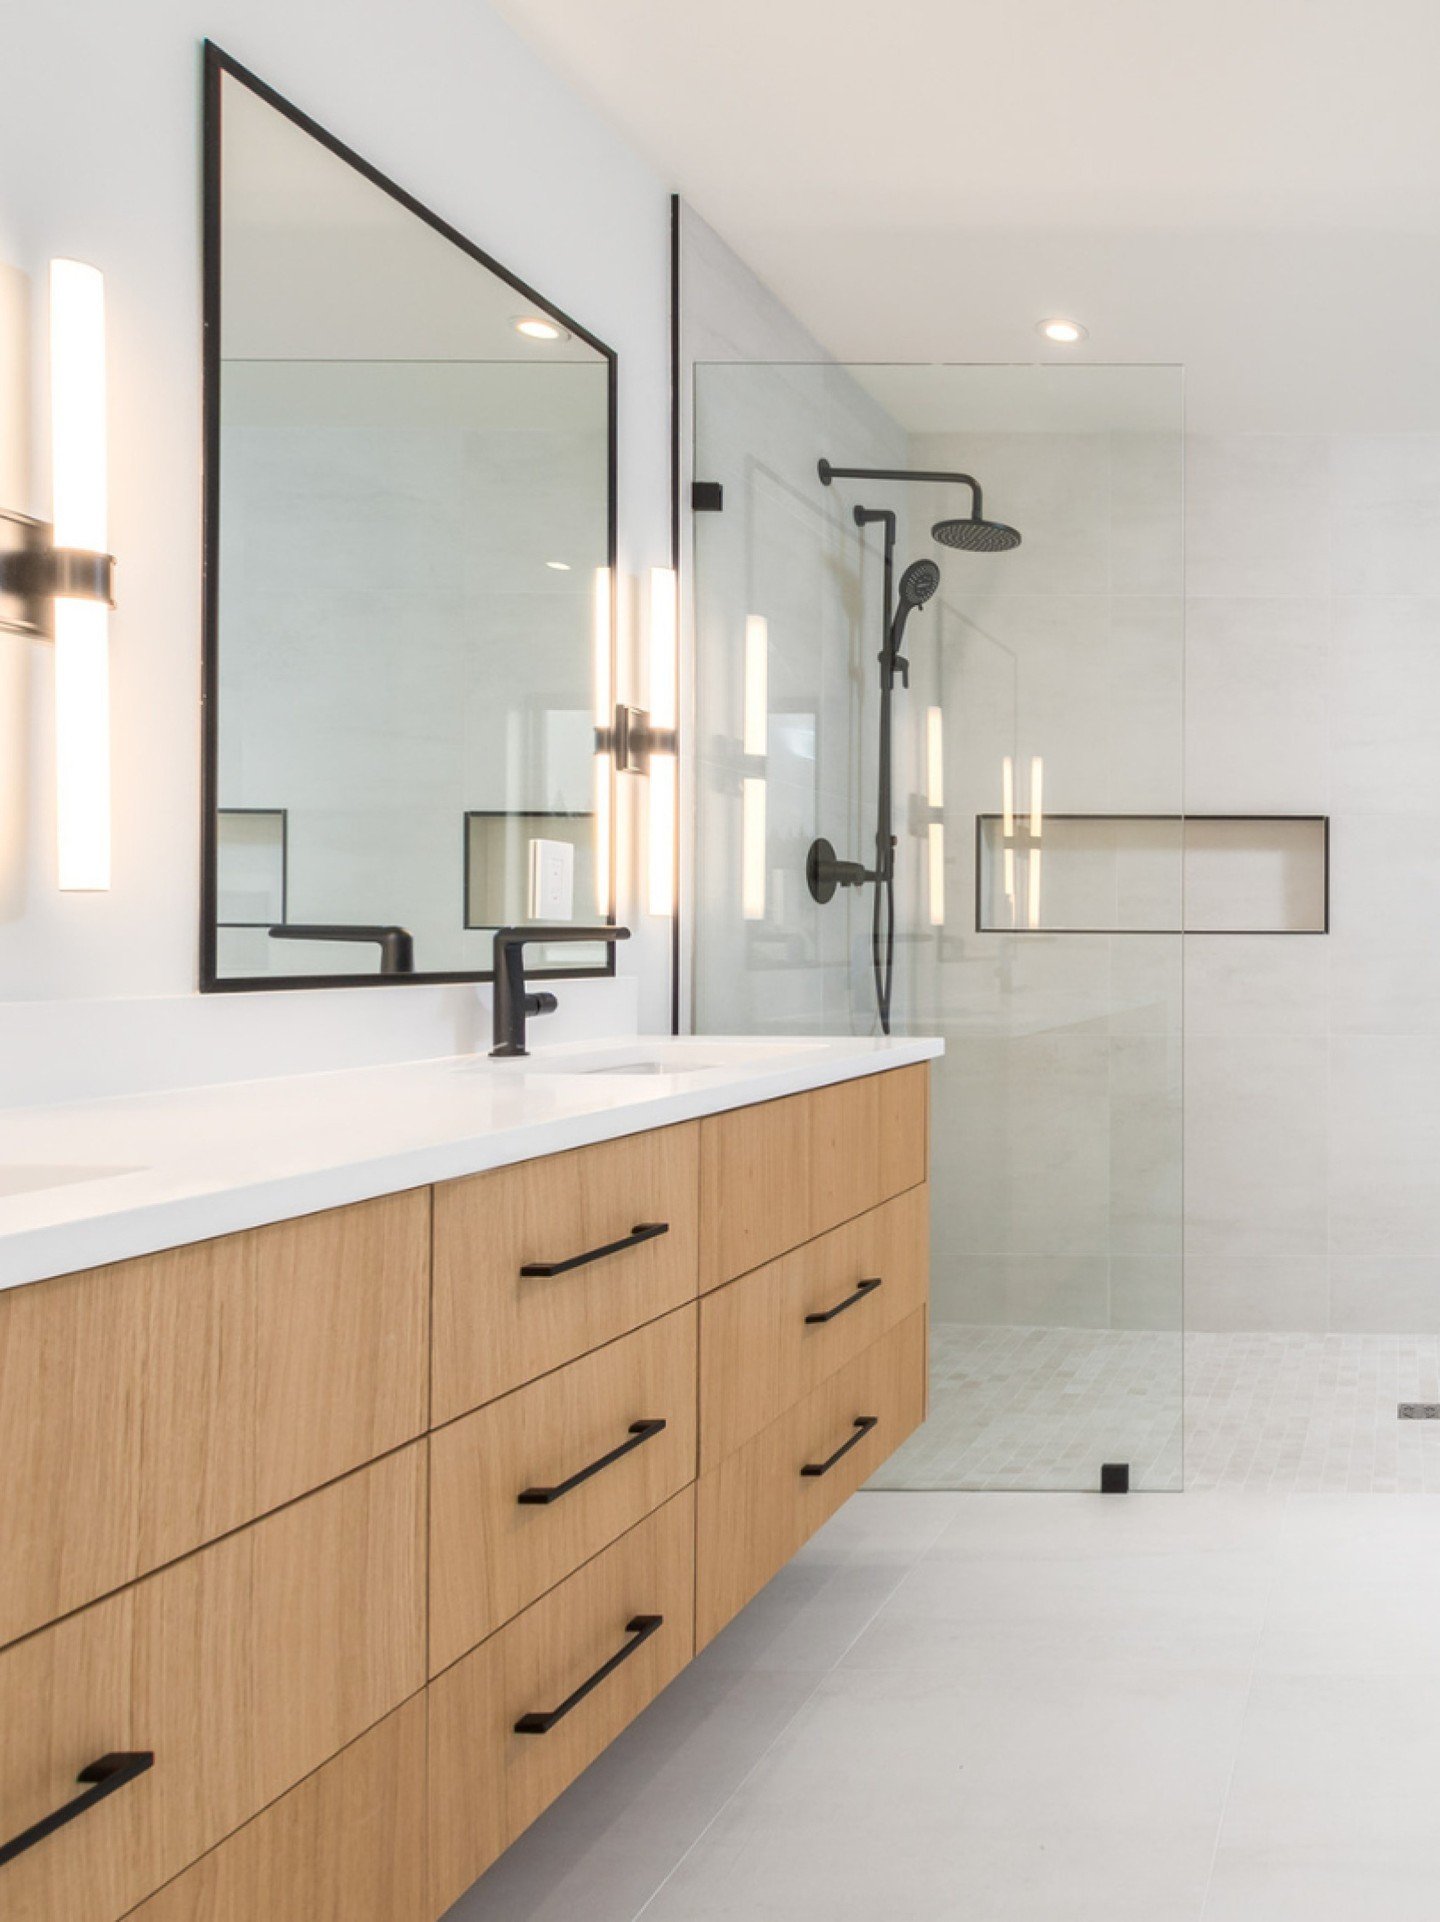 This Squamish spa bathroom offers dual shower heads and a freestanding tub, creating the ultimate sanctuary for relaxation and rejuvenation. 🛁
.
.
.
.
.
#sunnycresthomes #riobel #fixtures #duravit #sink #taymor #hardware #kuzco #lighting #ames #tile